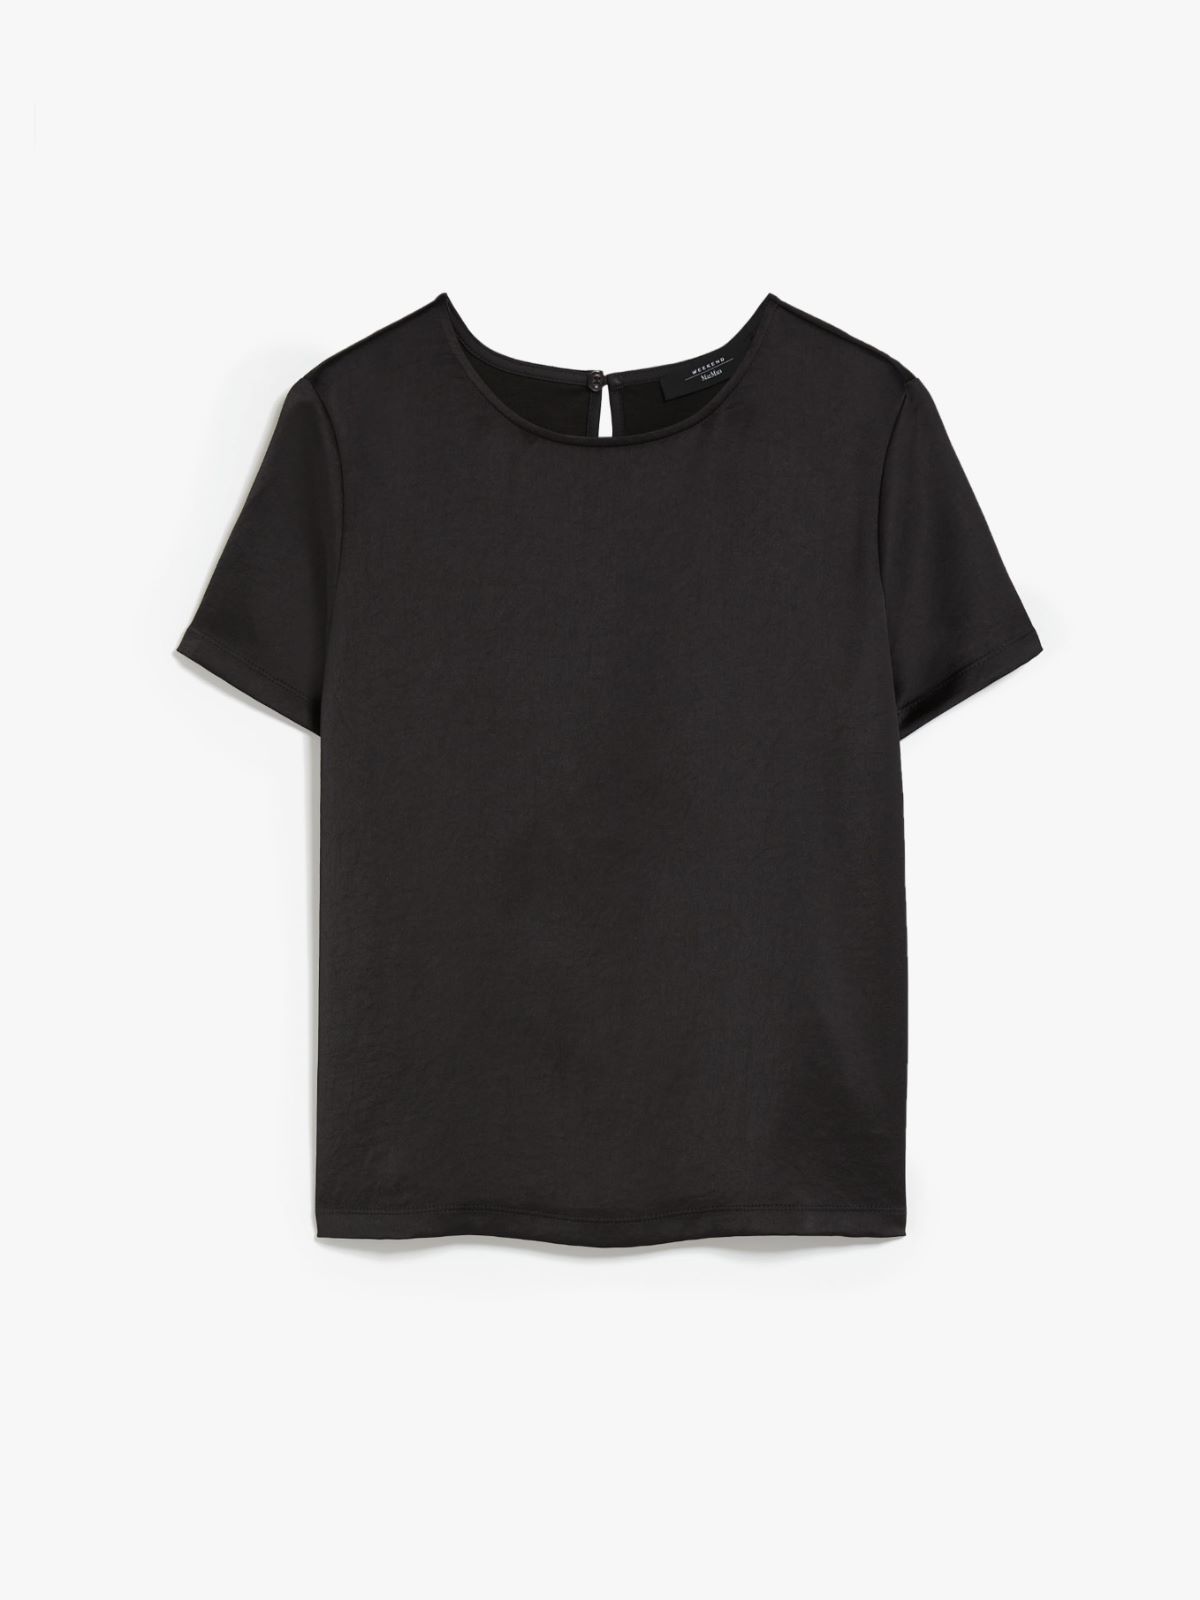 Blouse in satin and jersey - BLACK - Weekend Max Mara - 6